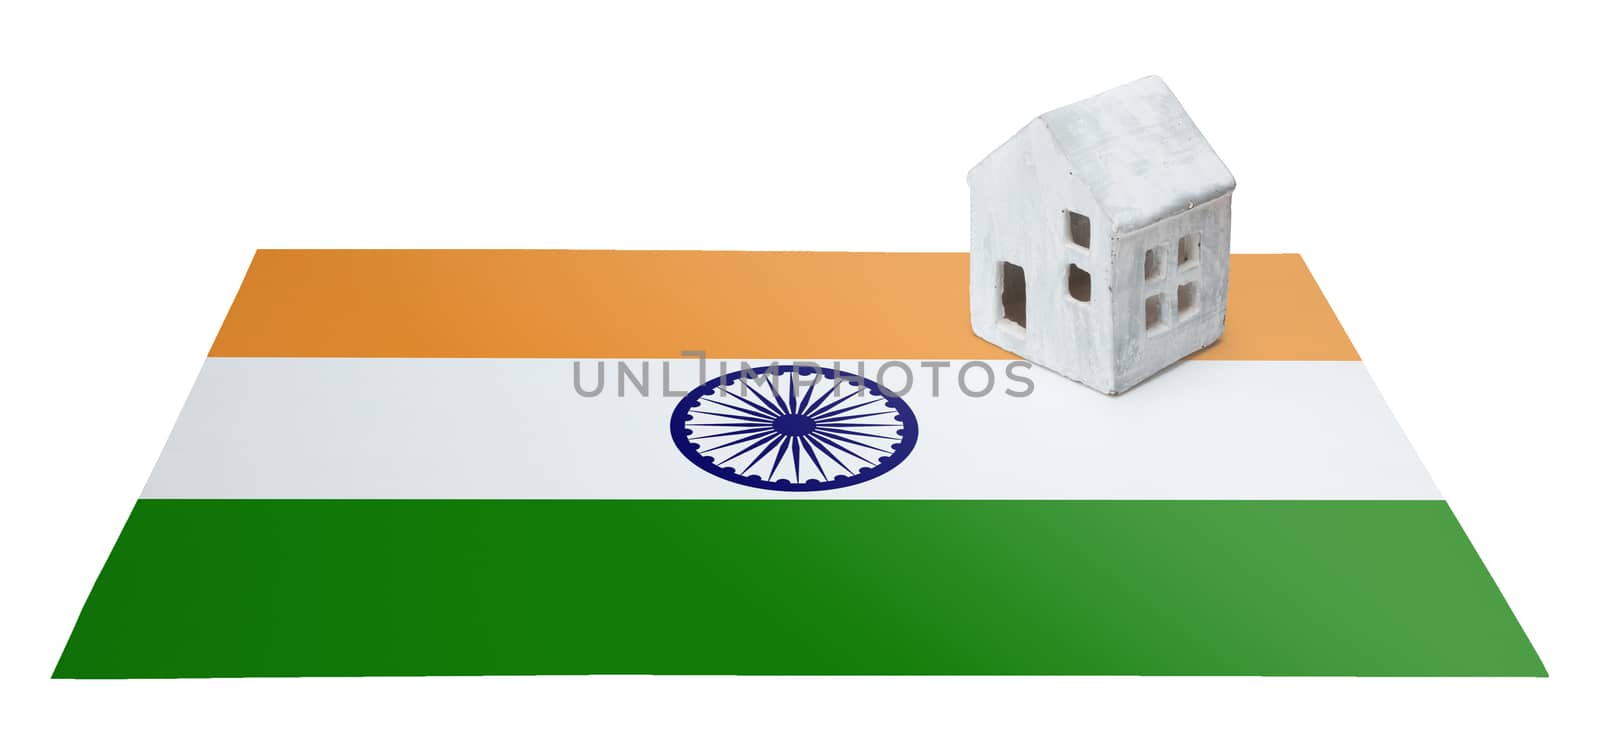 Small house on a flag - Living or migrating to India